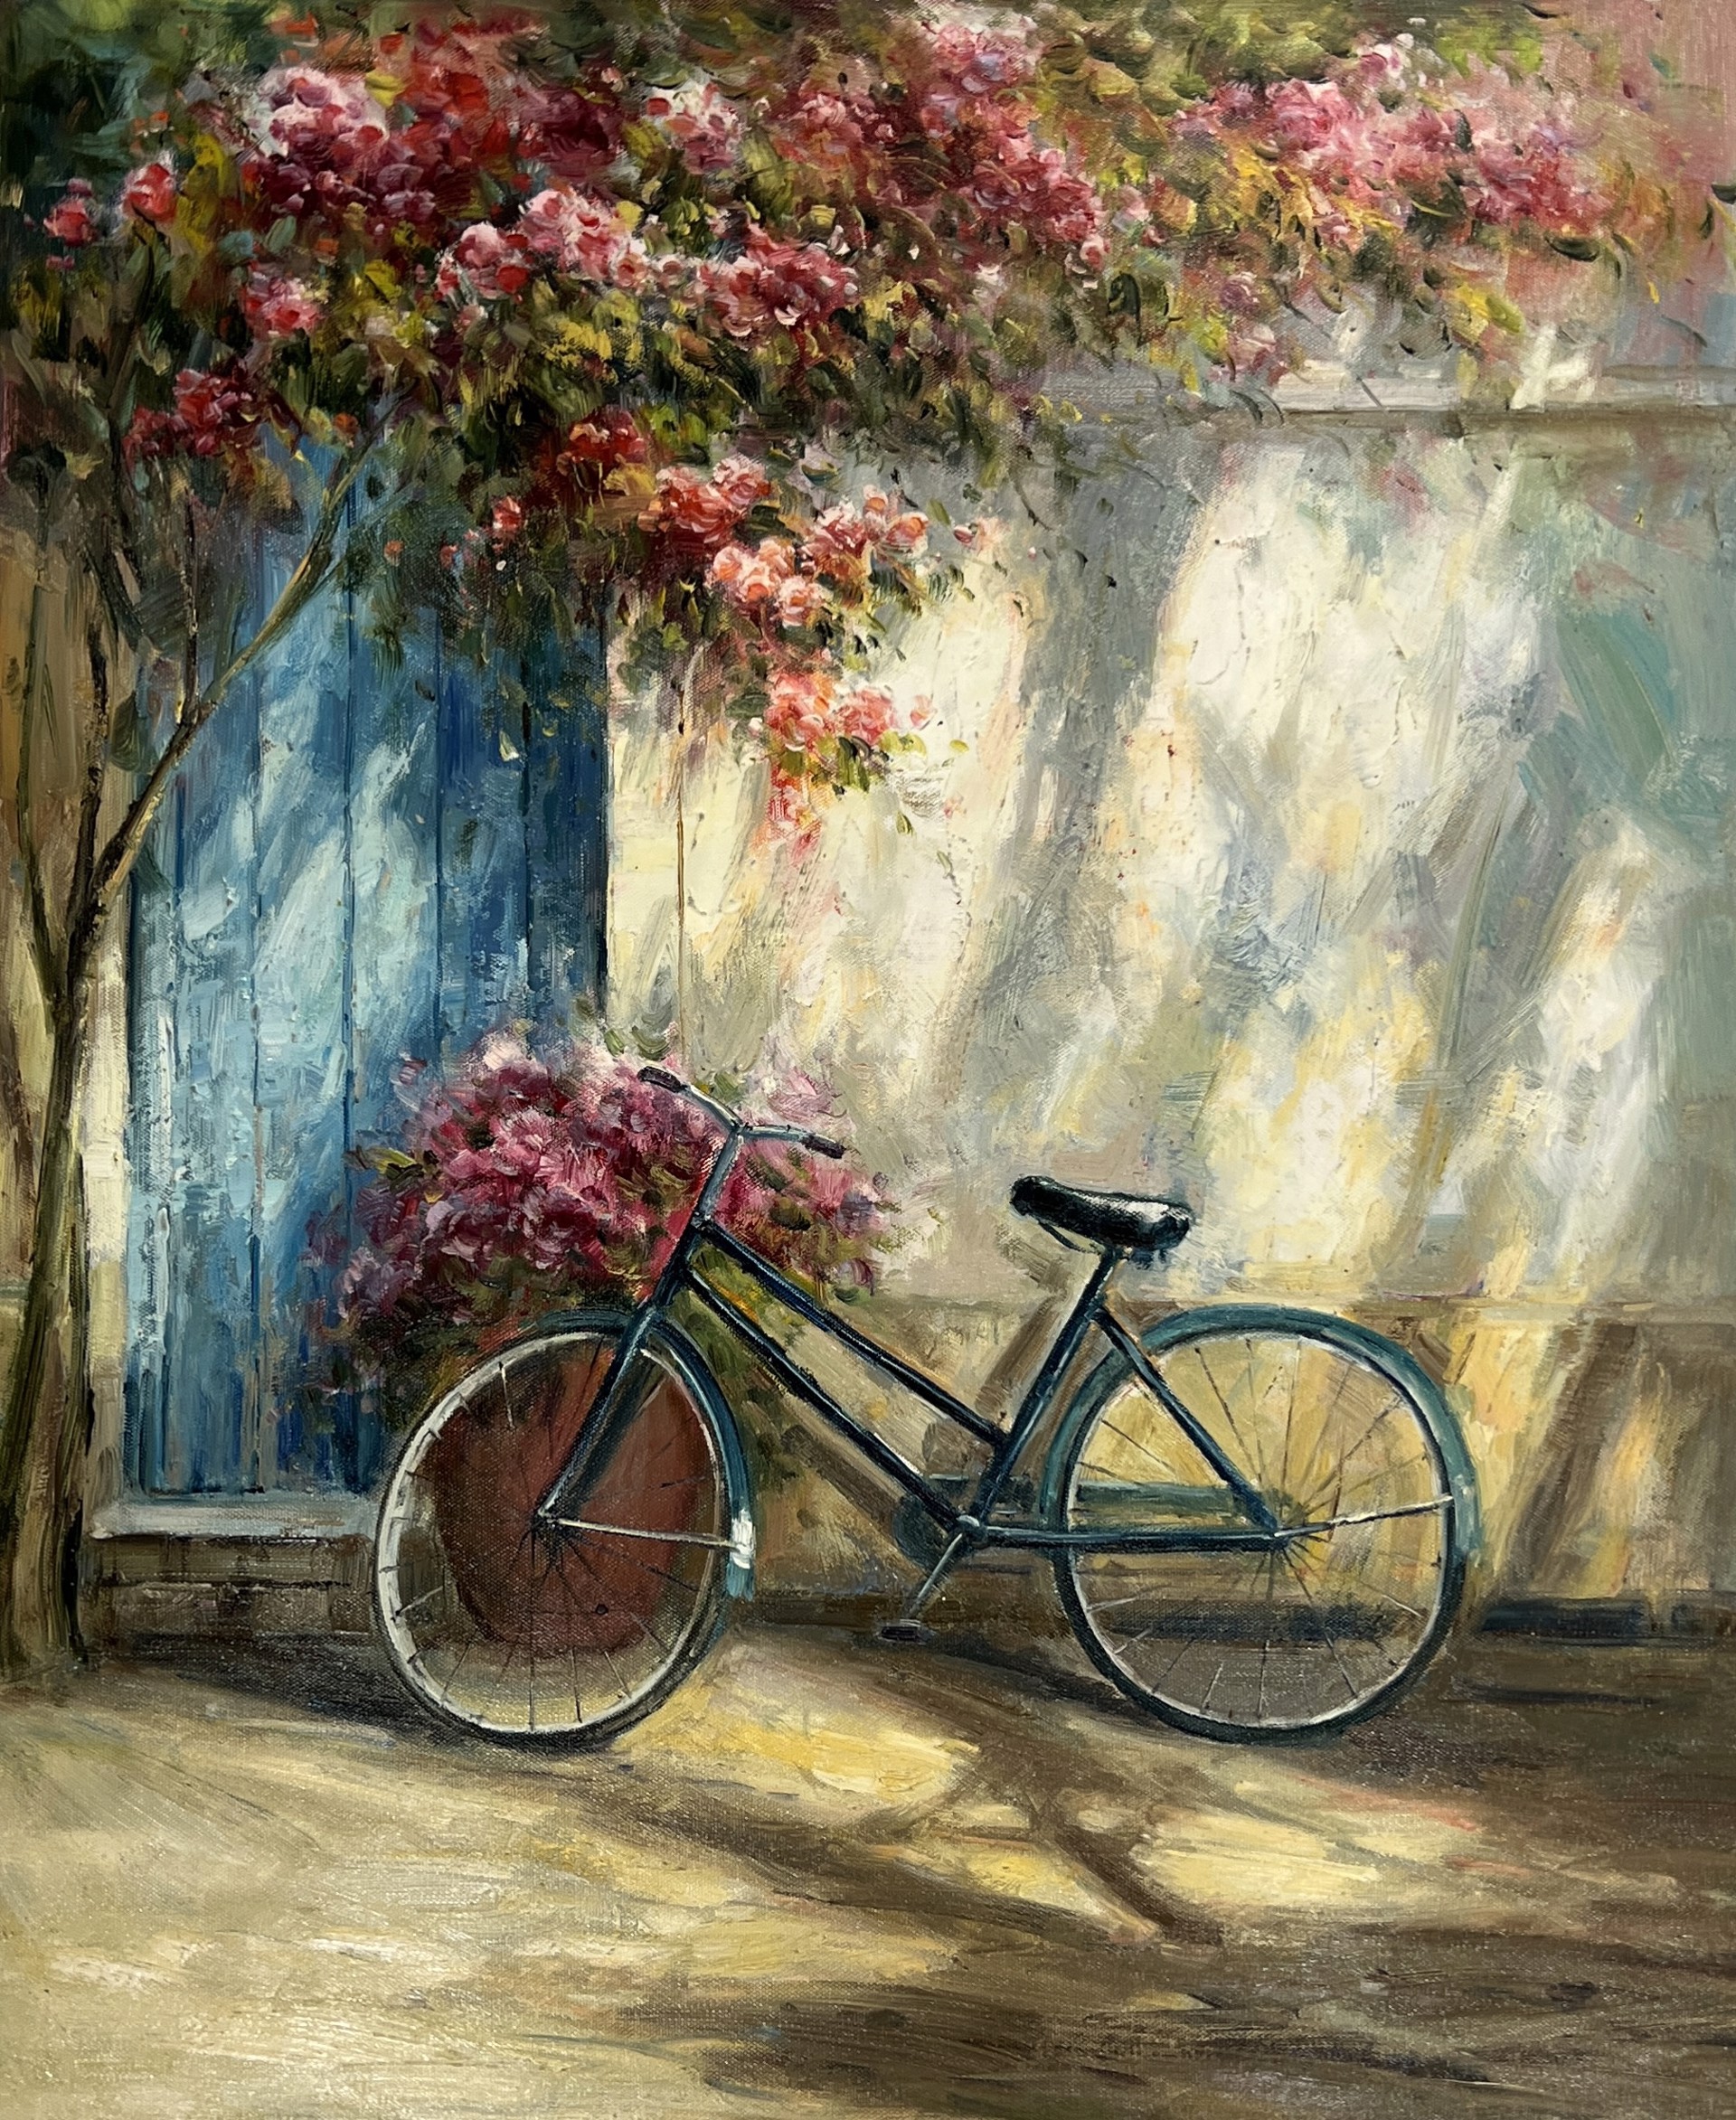 BICYCLE BY THE DOOR by ERIC SUN